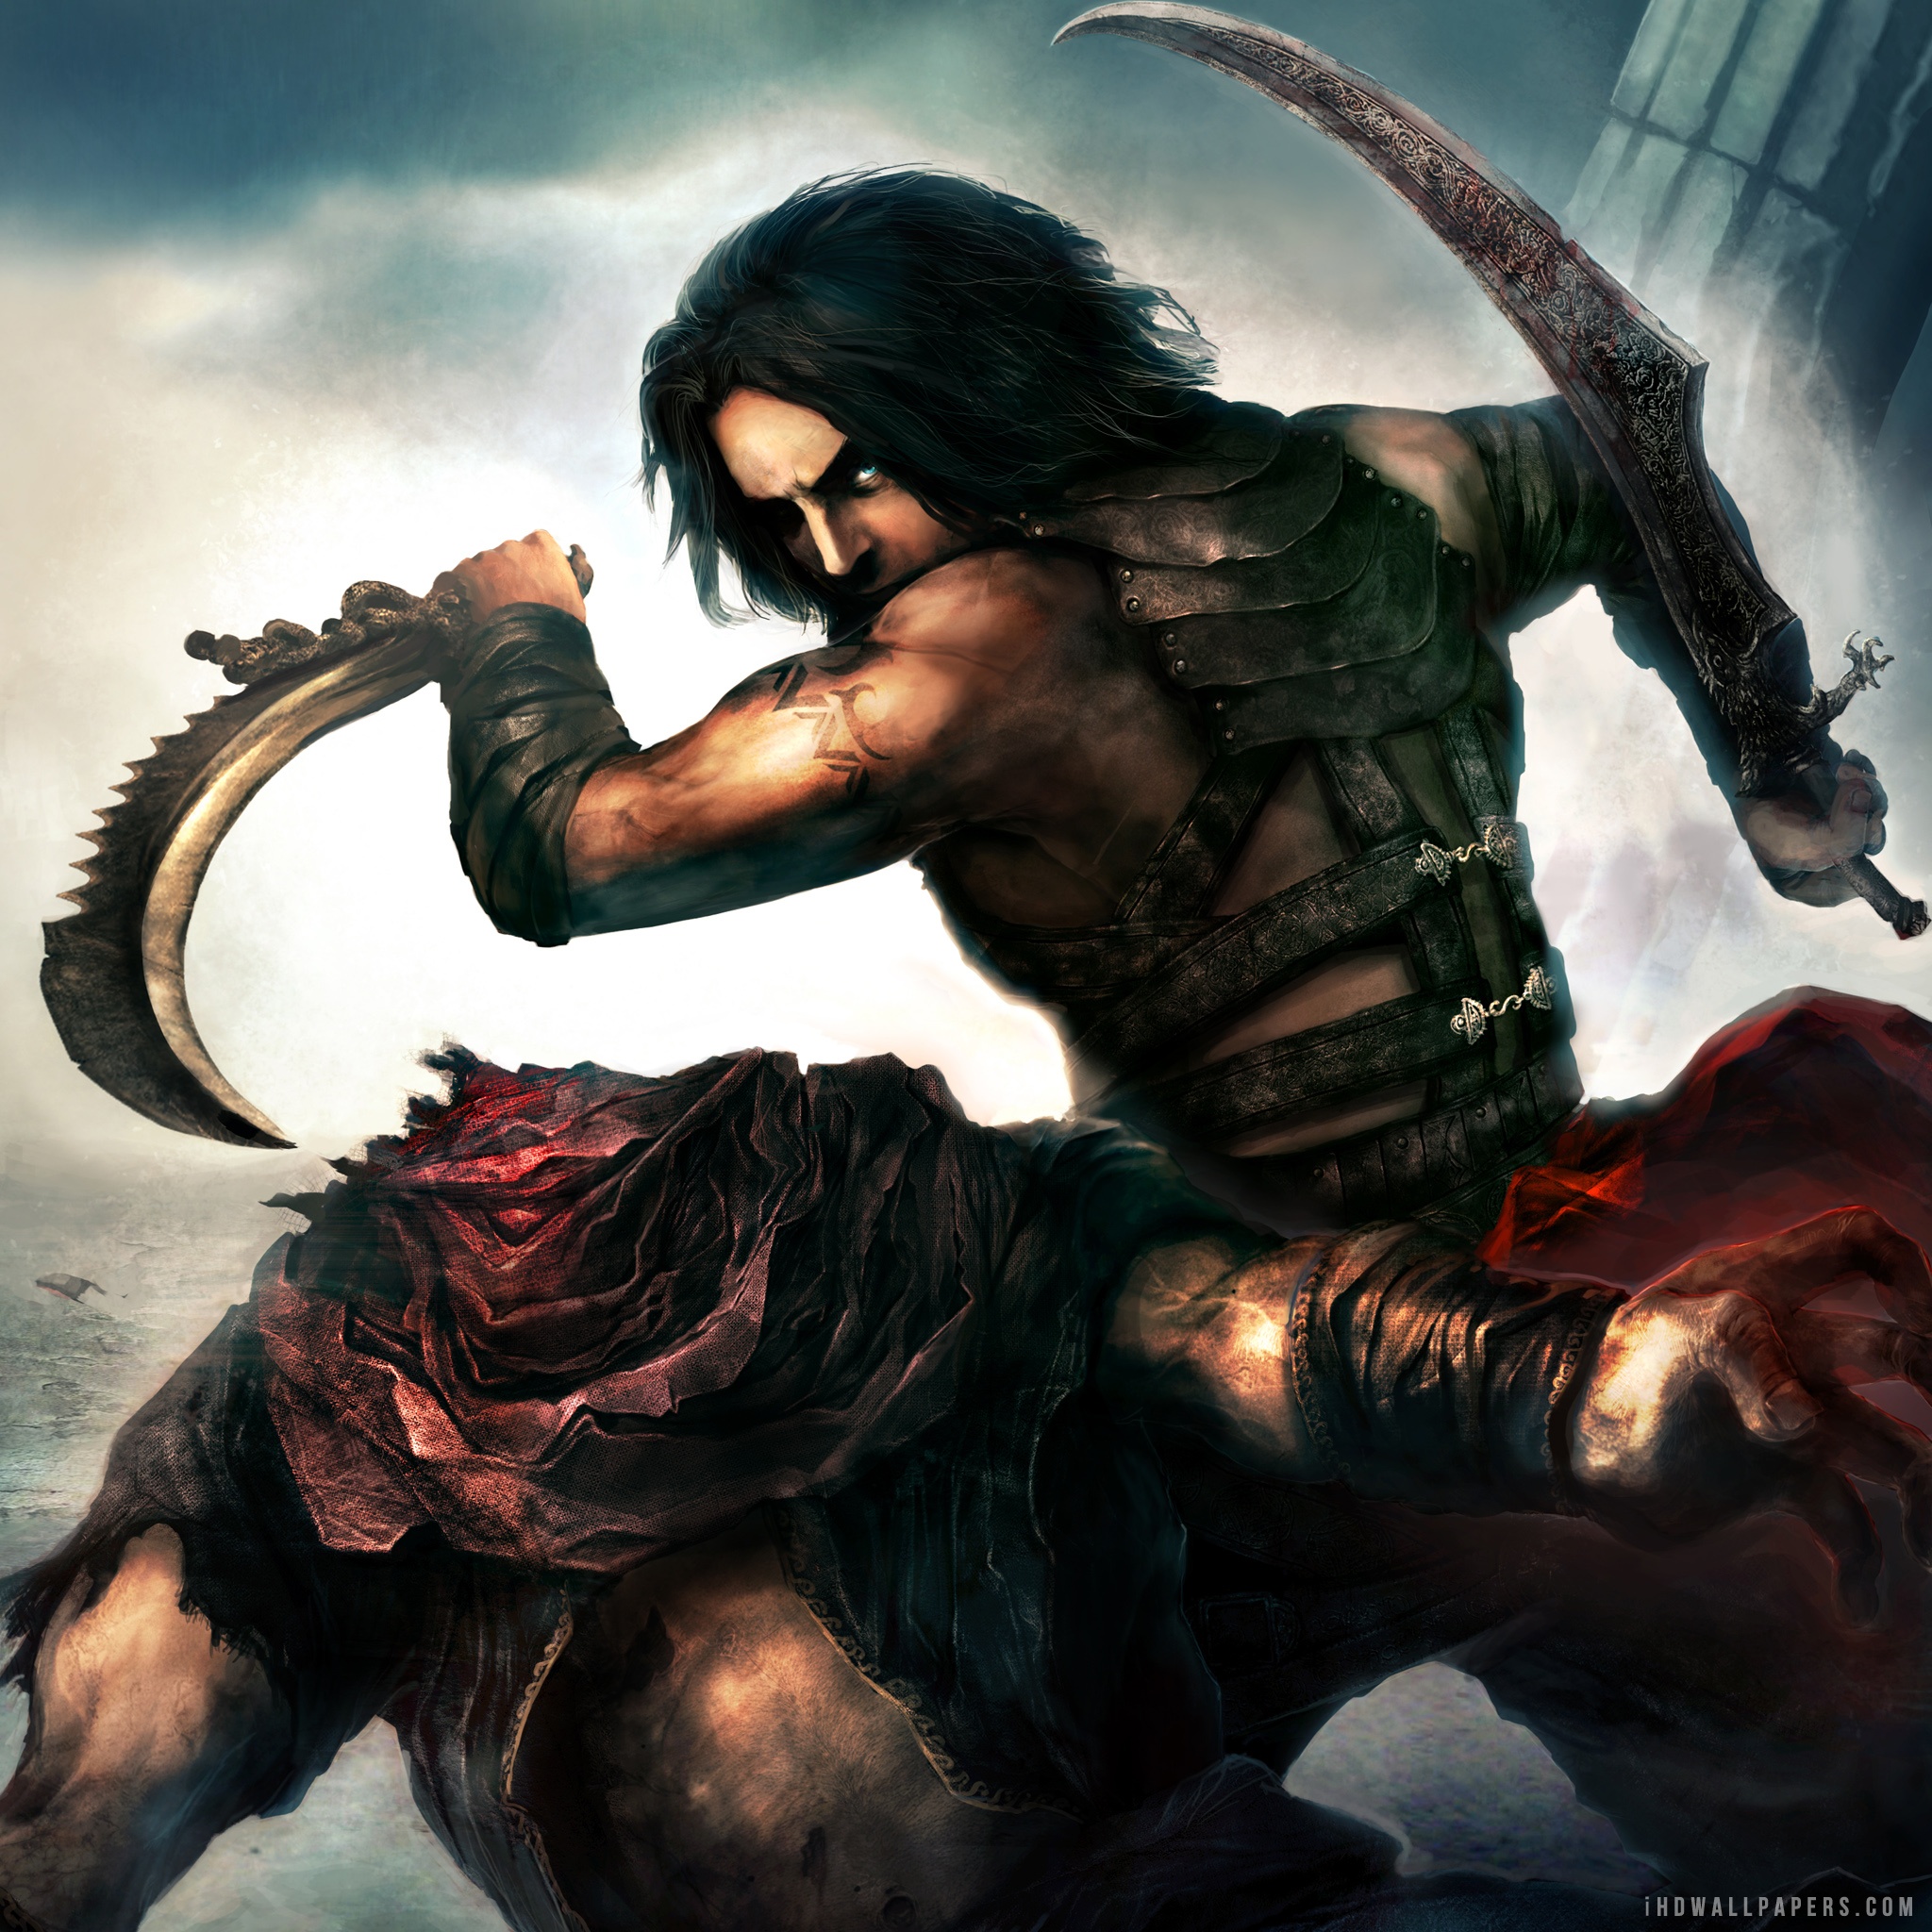 Free Download Prince Of Persia Warrior Within Hd Wallpaper Ihd Images, Photos, Reviews